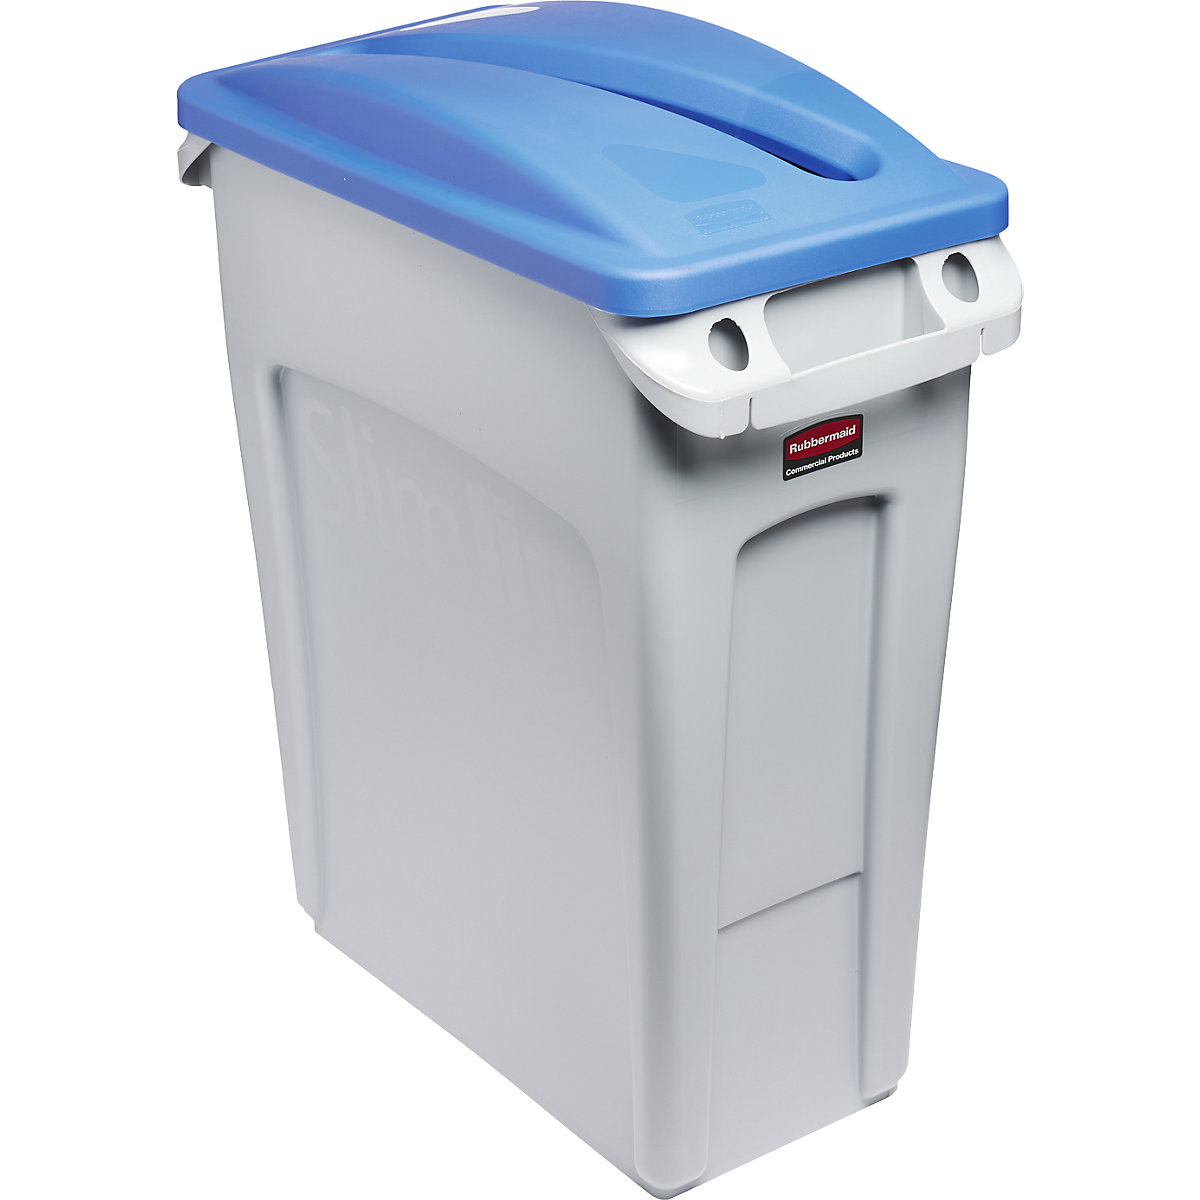 SLIM JIM® recyclable waste collector – Rubbermaid